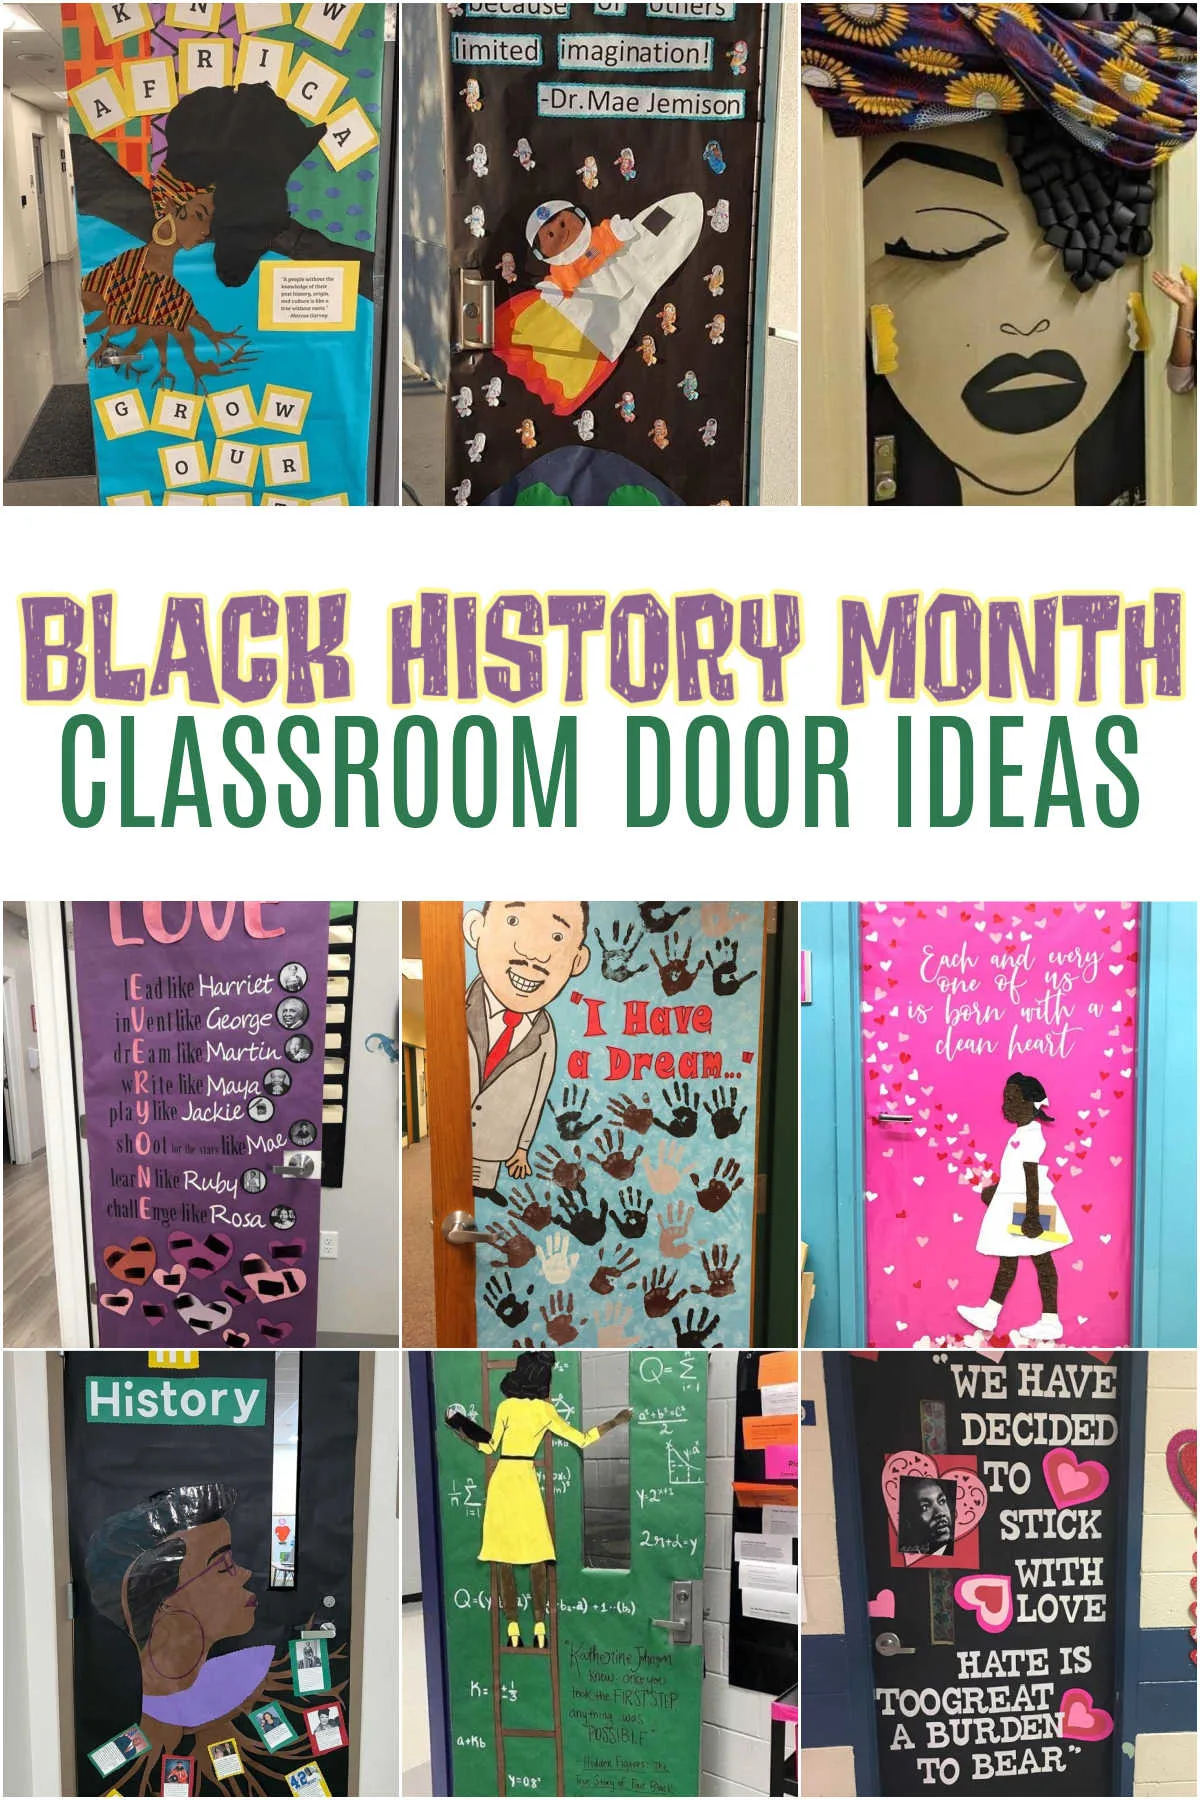 Collage of Classroom door ideas for Black History Month